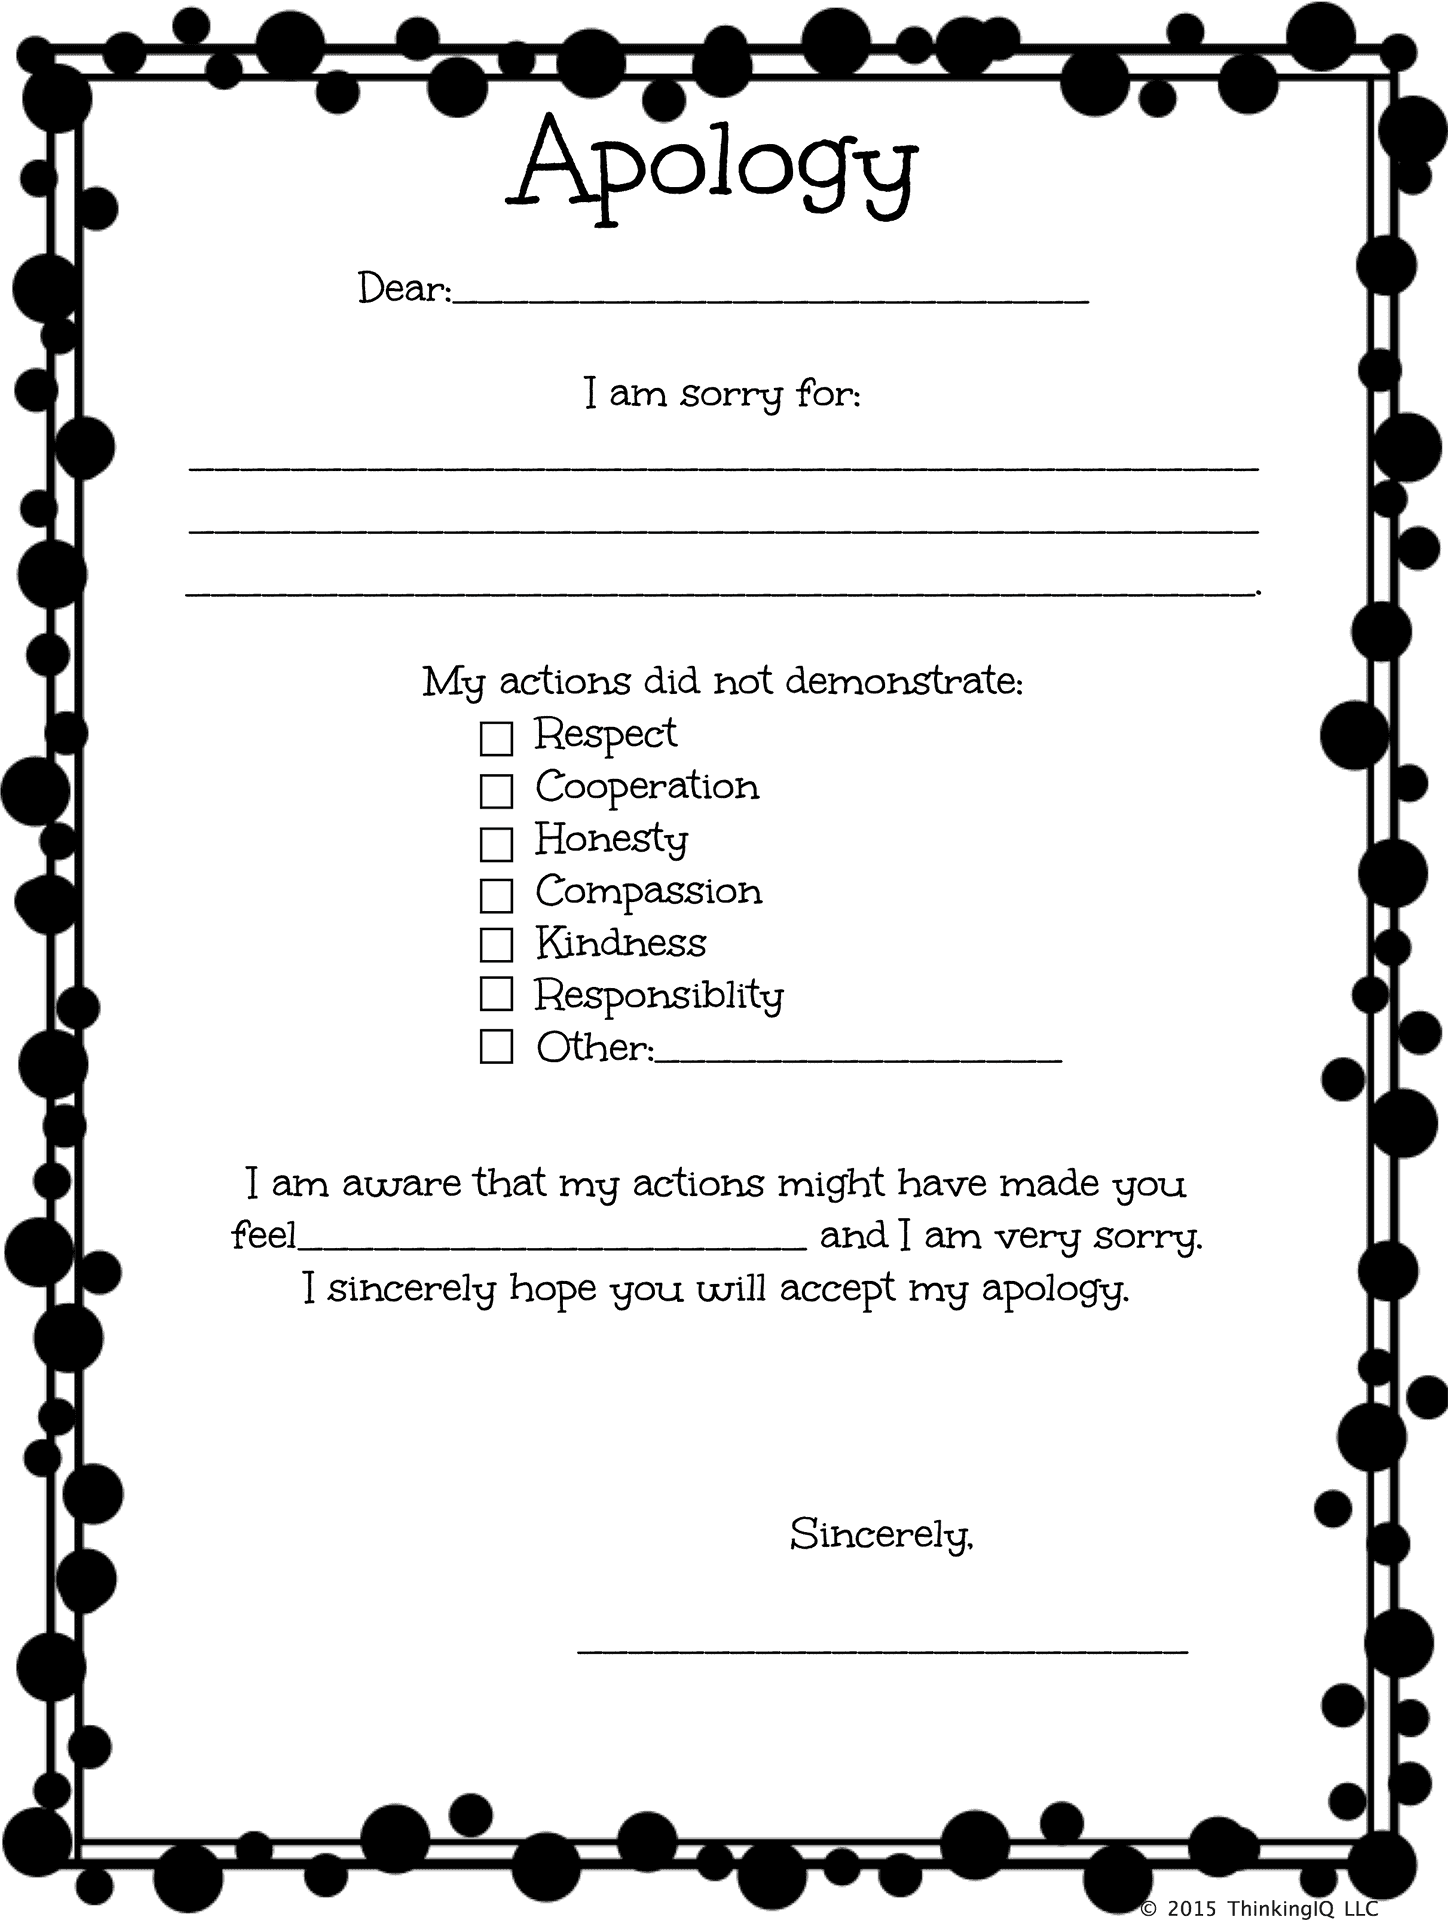 Apology Form Template PNG